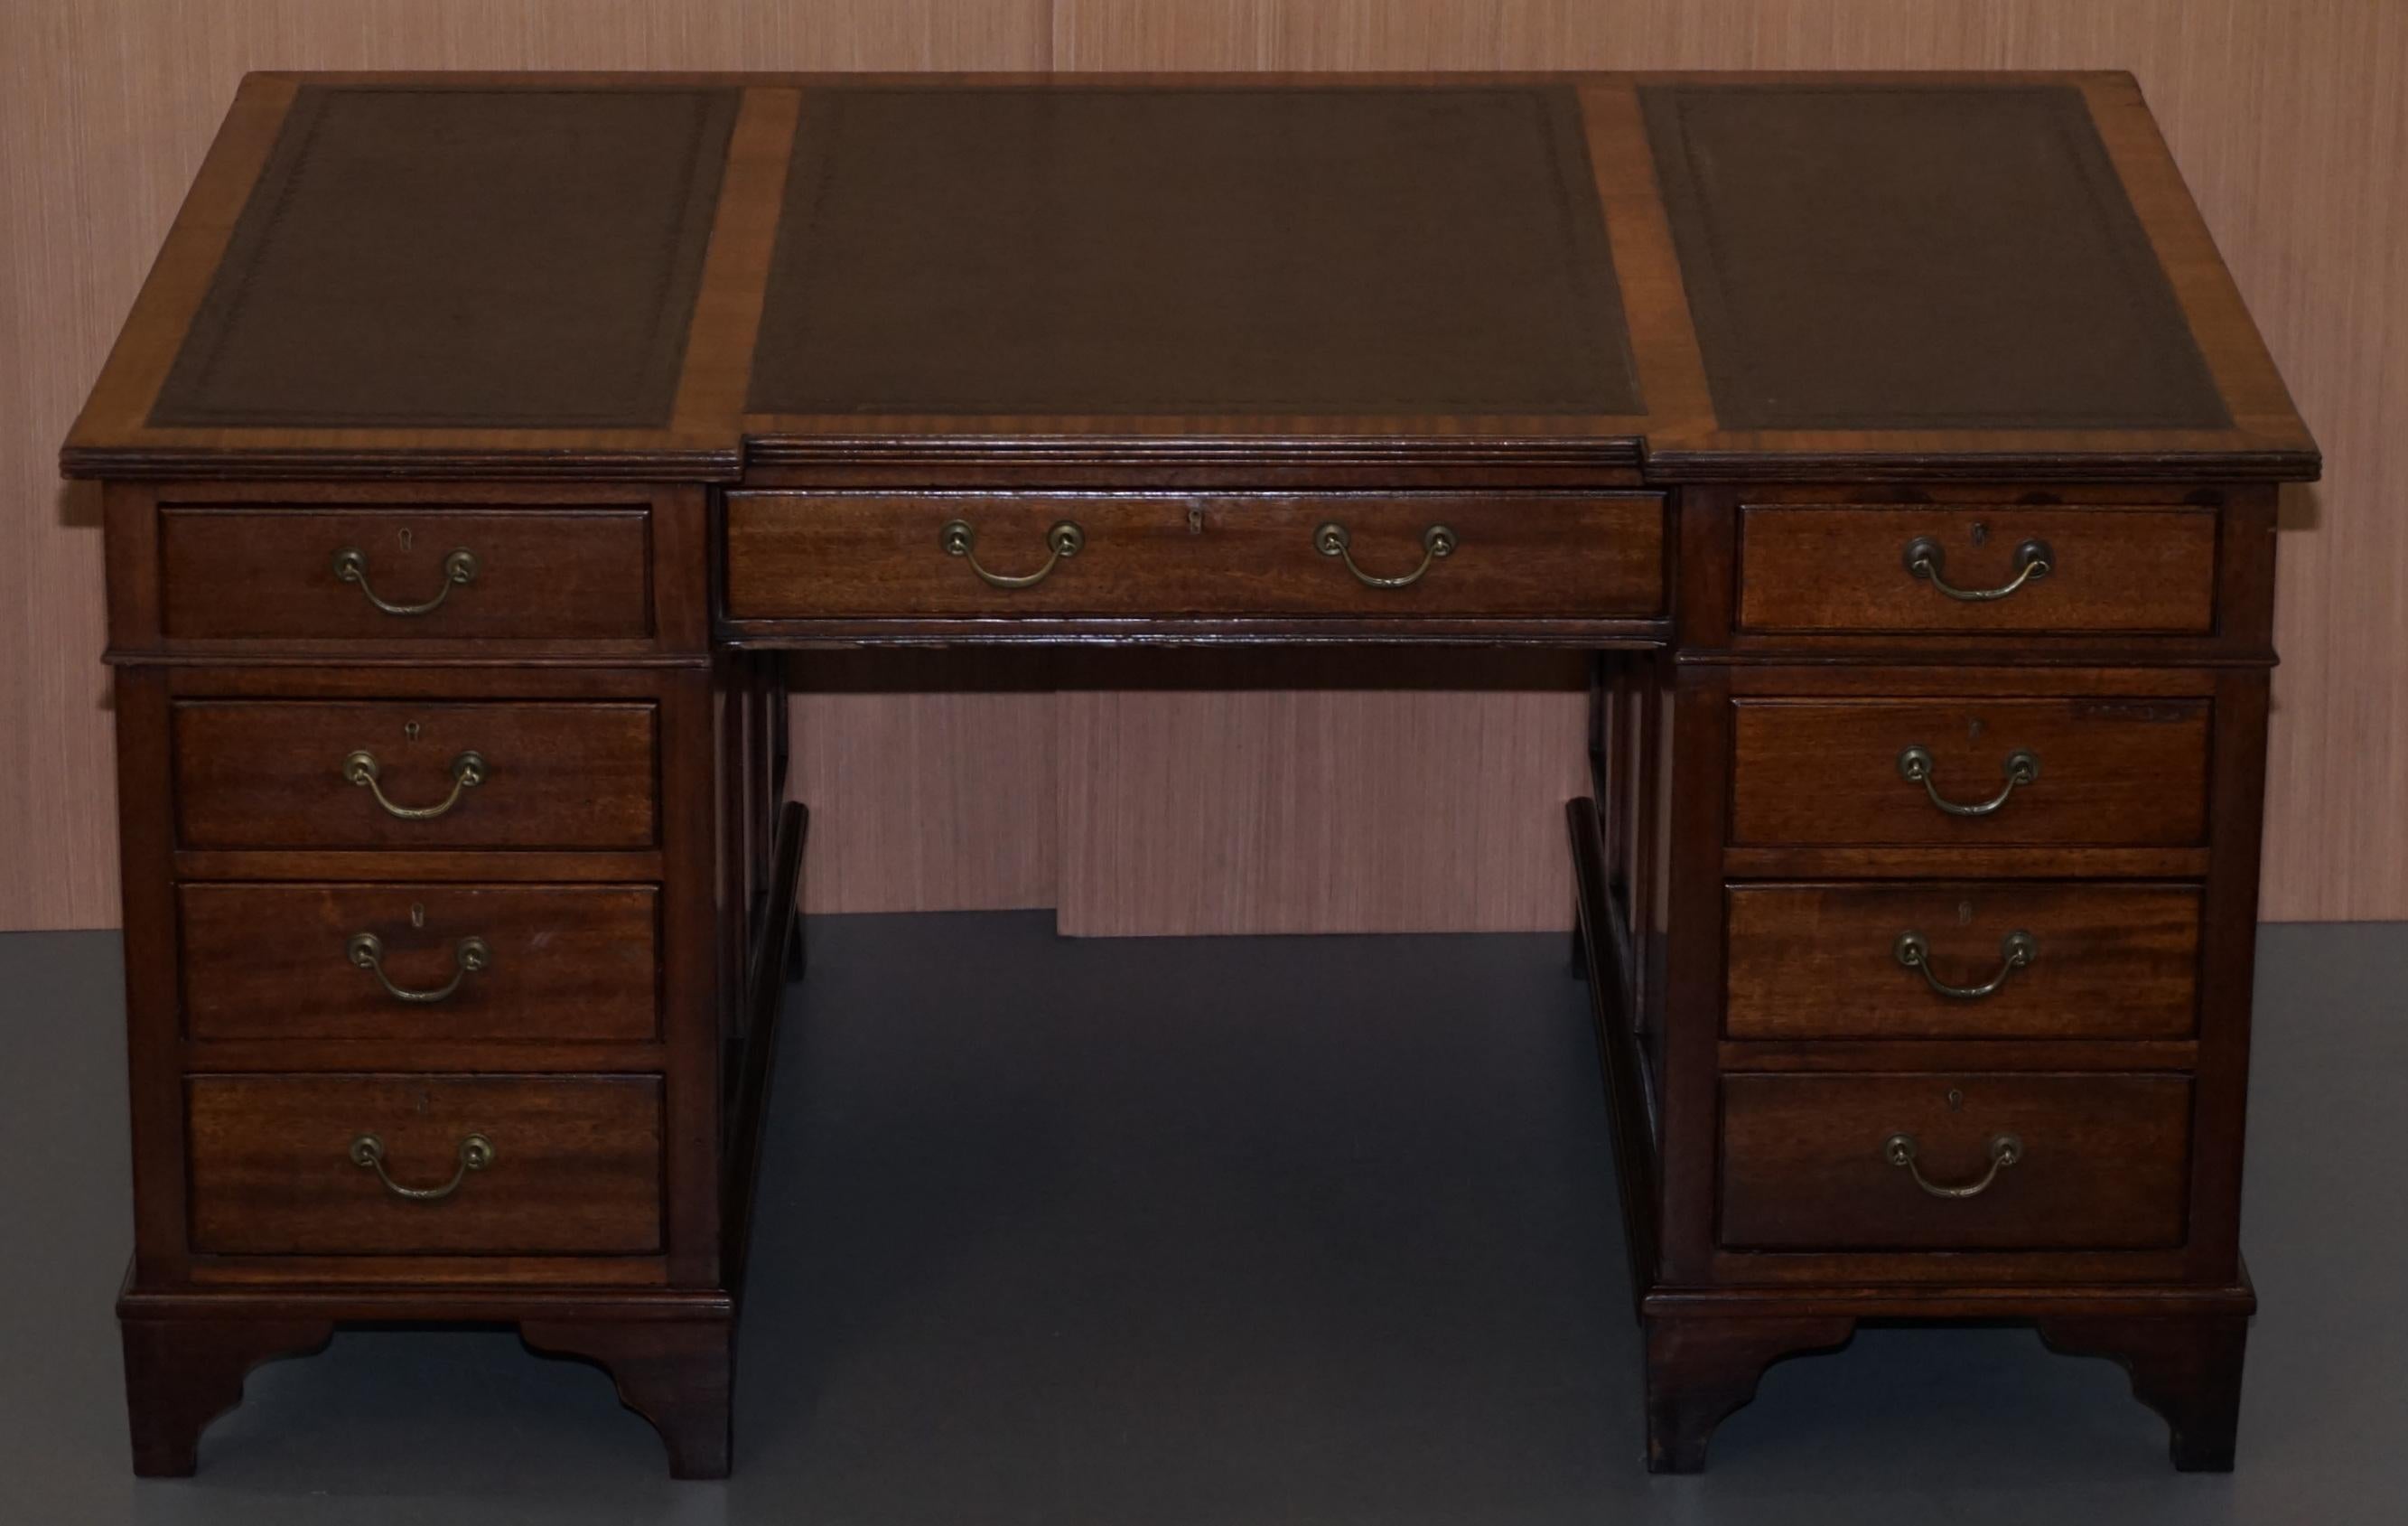 We are delighted to offer for sale this medium sized Victorian twin pedestal 12-drawer 2 cupboards double sided mahogany partner desk with green leather top

This desk is a good medium size, the main side is slightly recessed inside the desk which